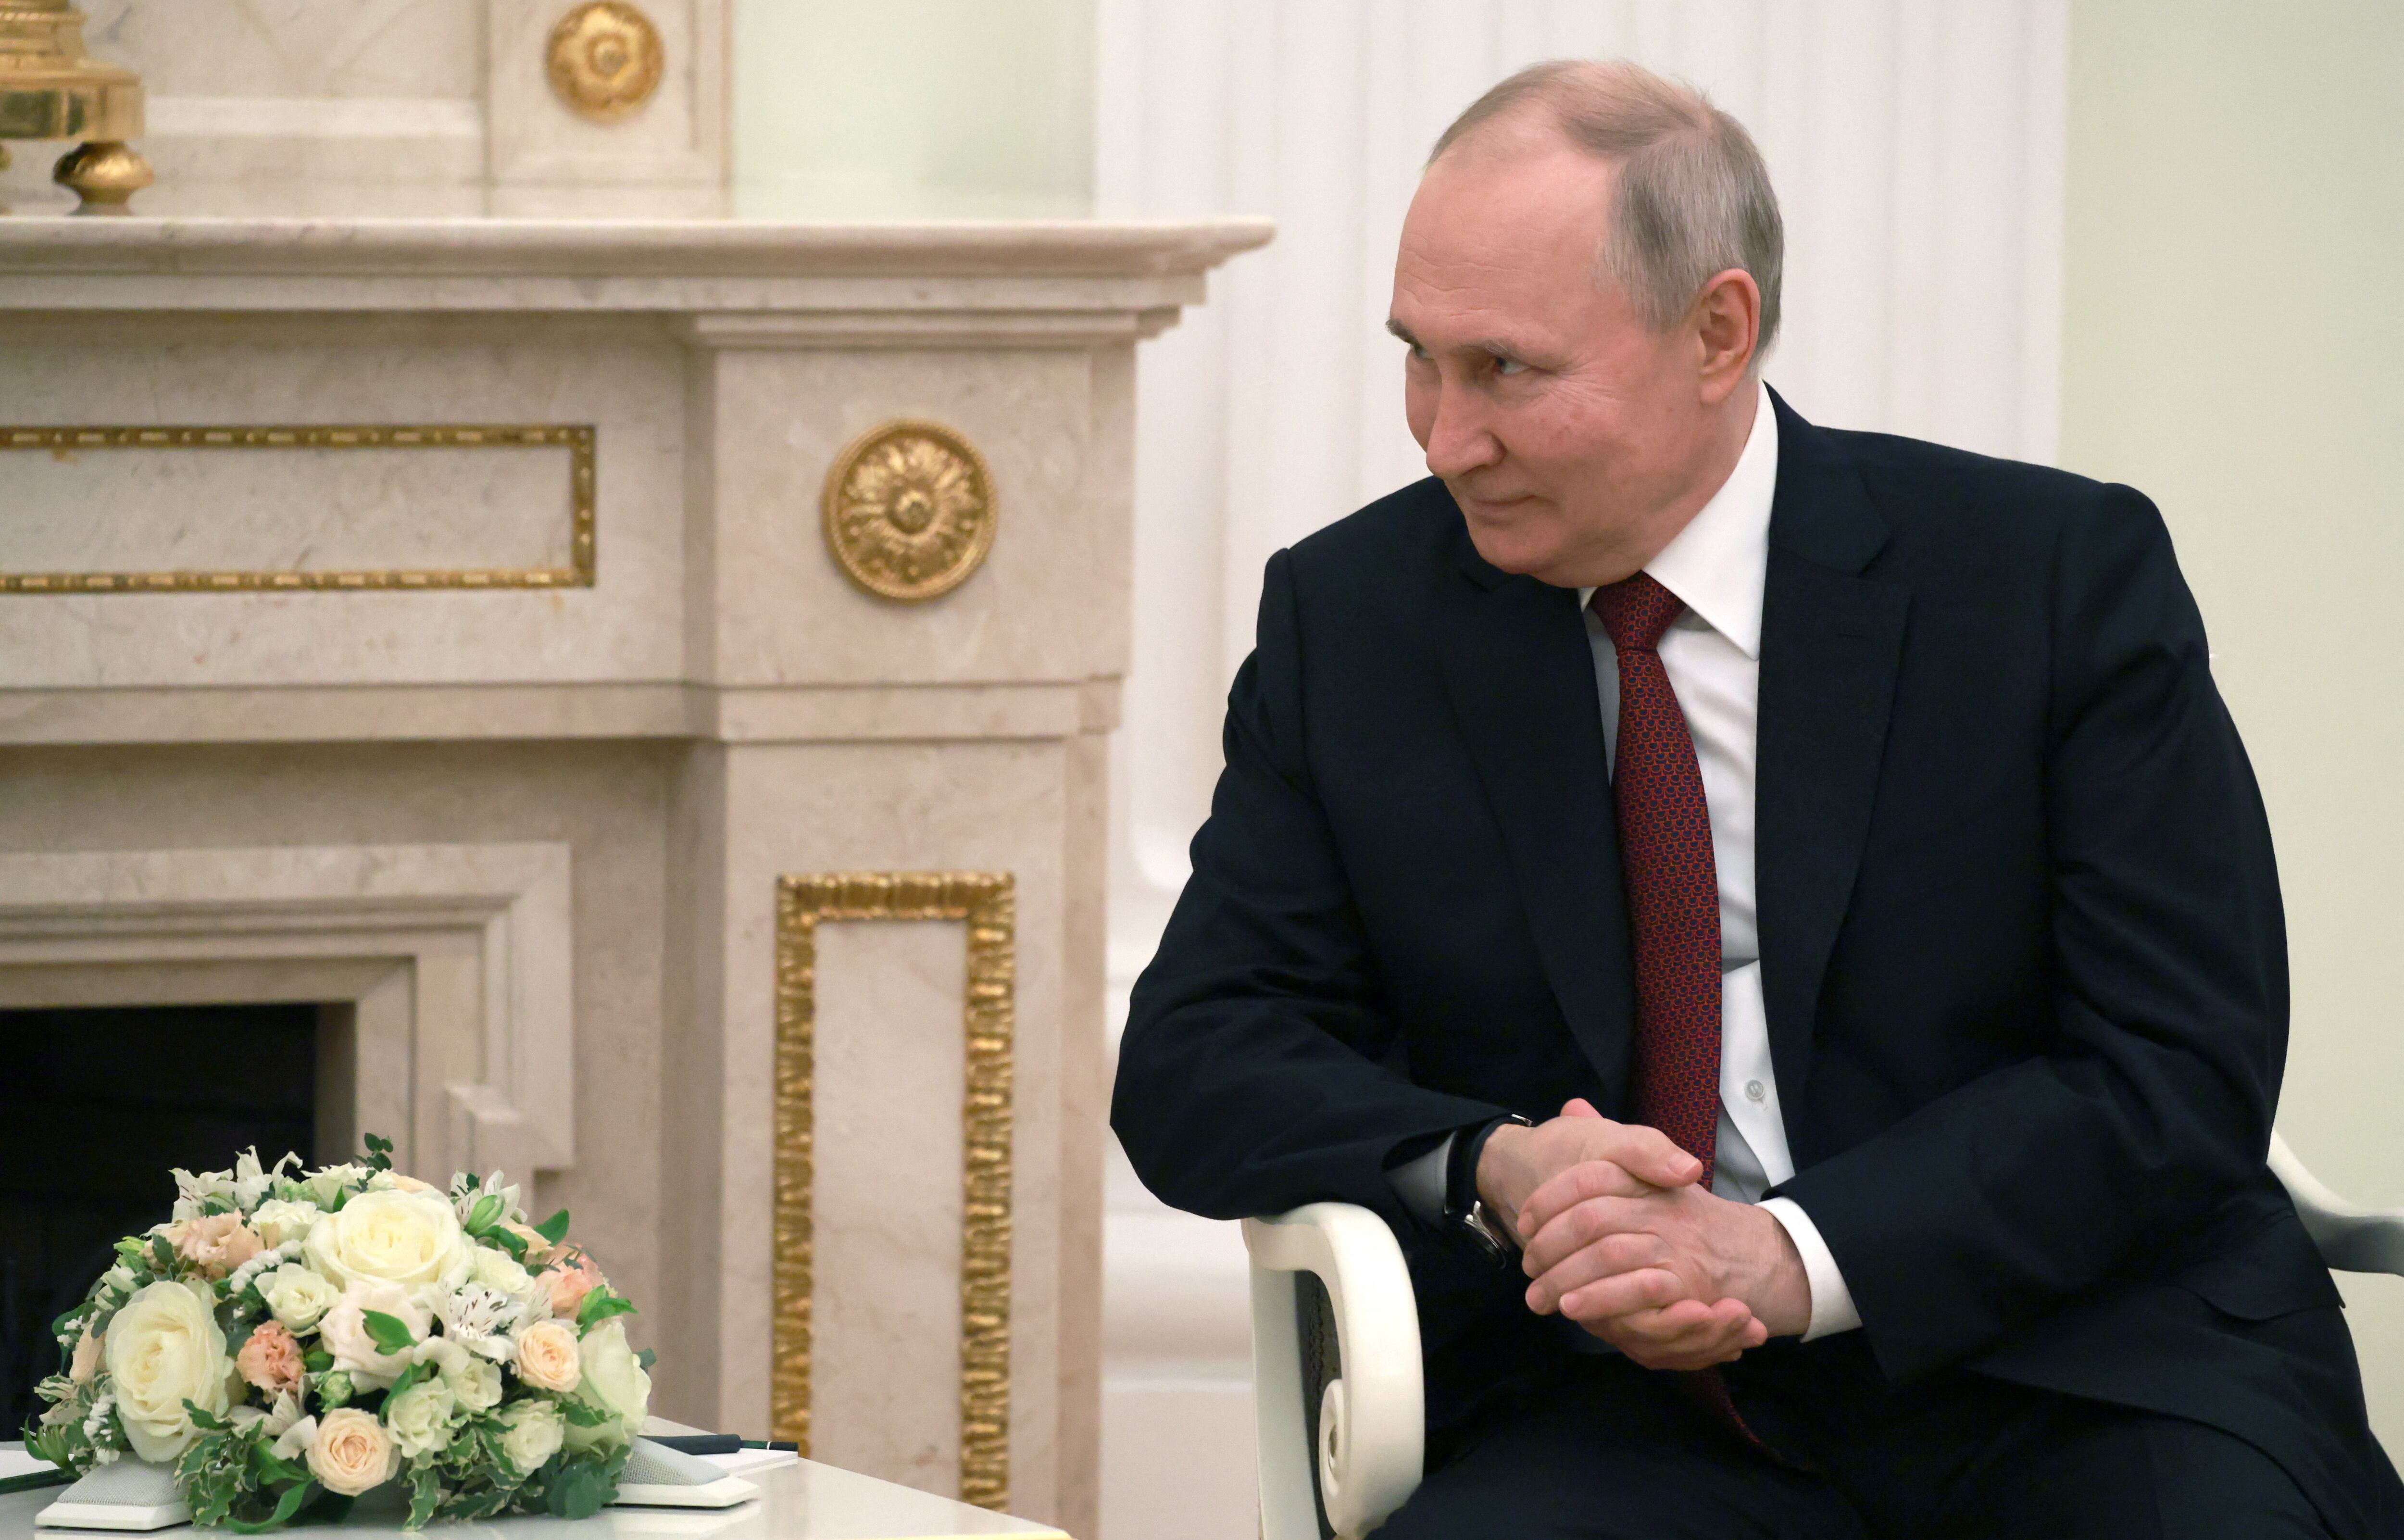 Russian President Vladimir Putin attends a meeting with Syrian President Bashar al-Assad at the Kremlin in Moscow, Russia, March 15, 2023. Sputnik/Vladimir Gerdo/Pool via REUTERS ATTENTION EDITORS - THIS IMAGE WAS PROVIDED BY A THIRD PARTY.